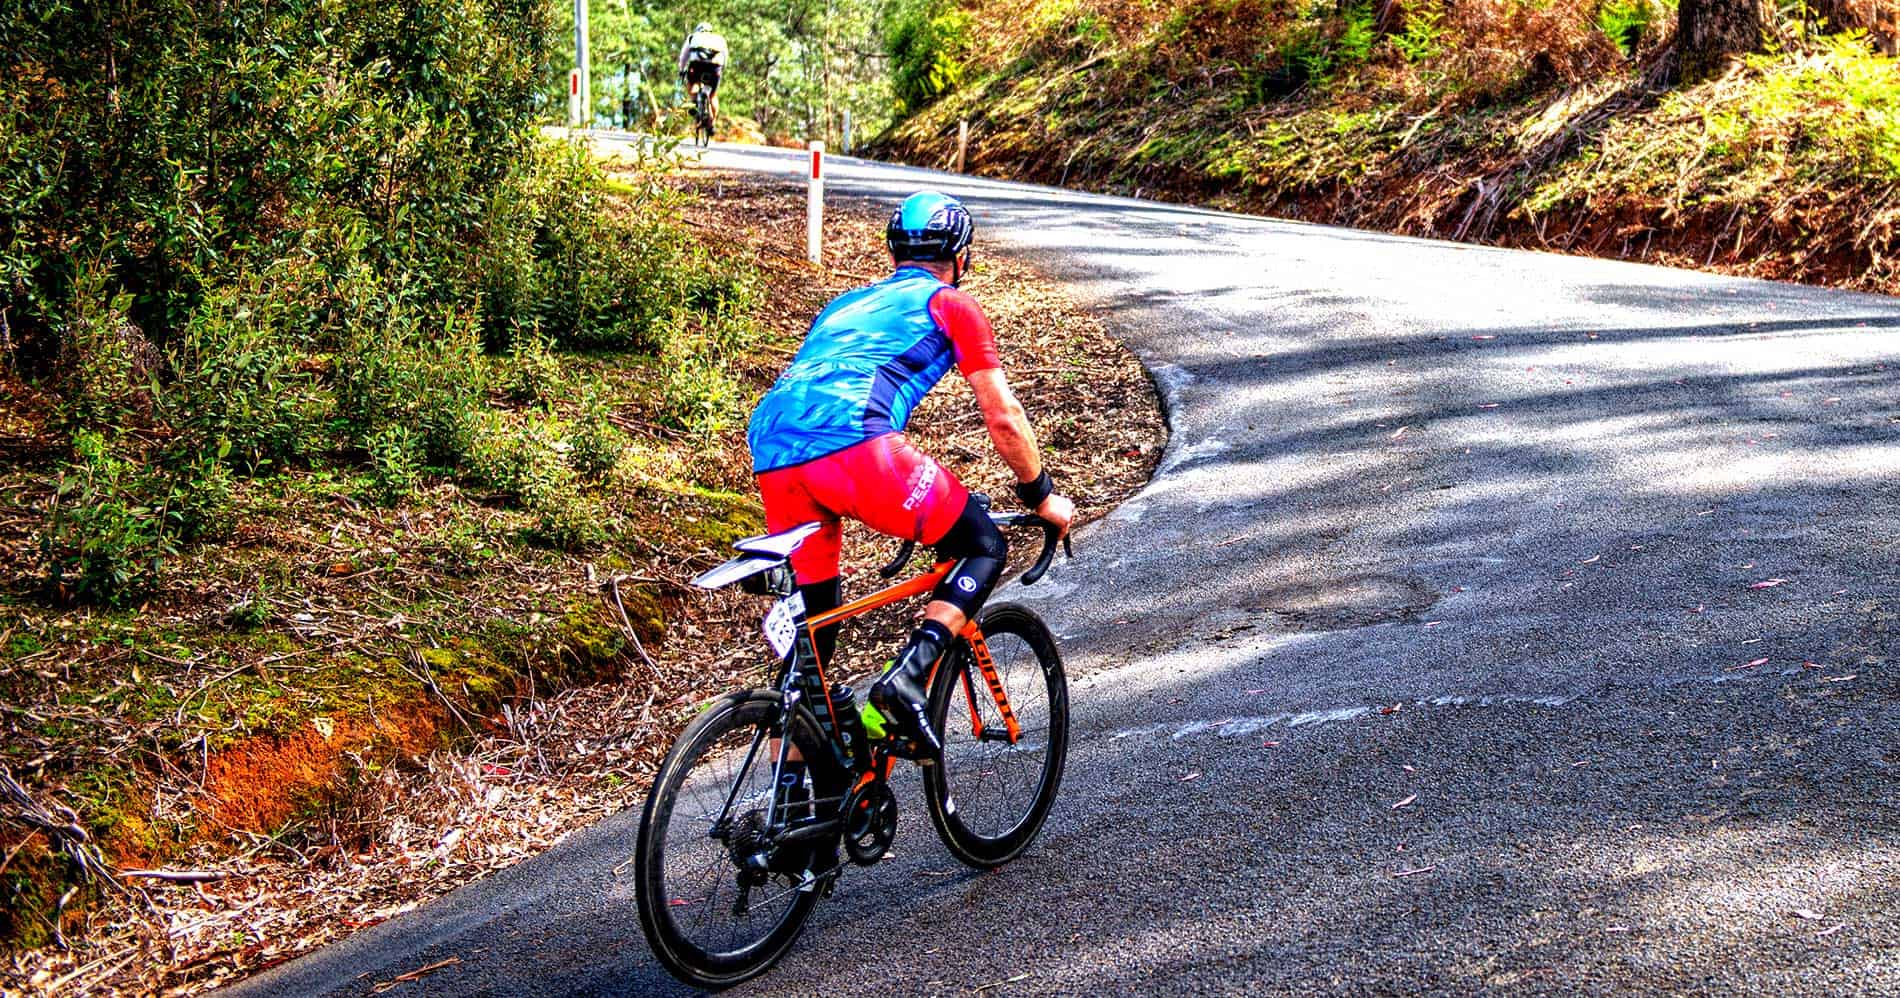 Hill Climbing Technique - Get Fast! - I Love Bicycling